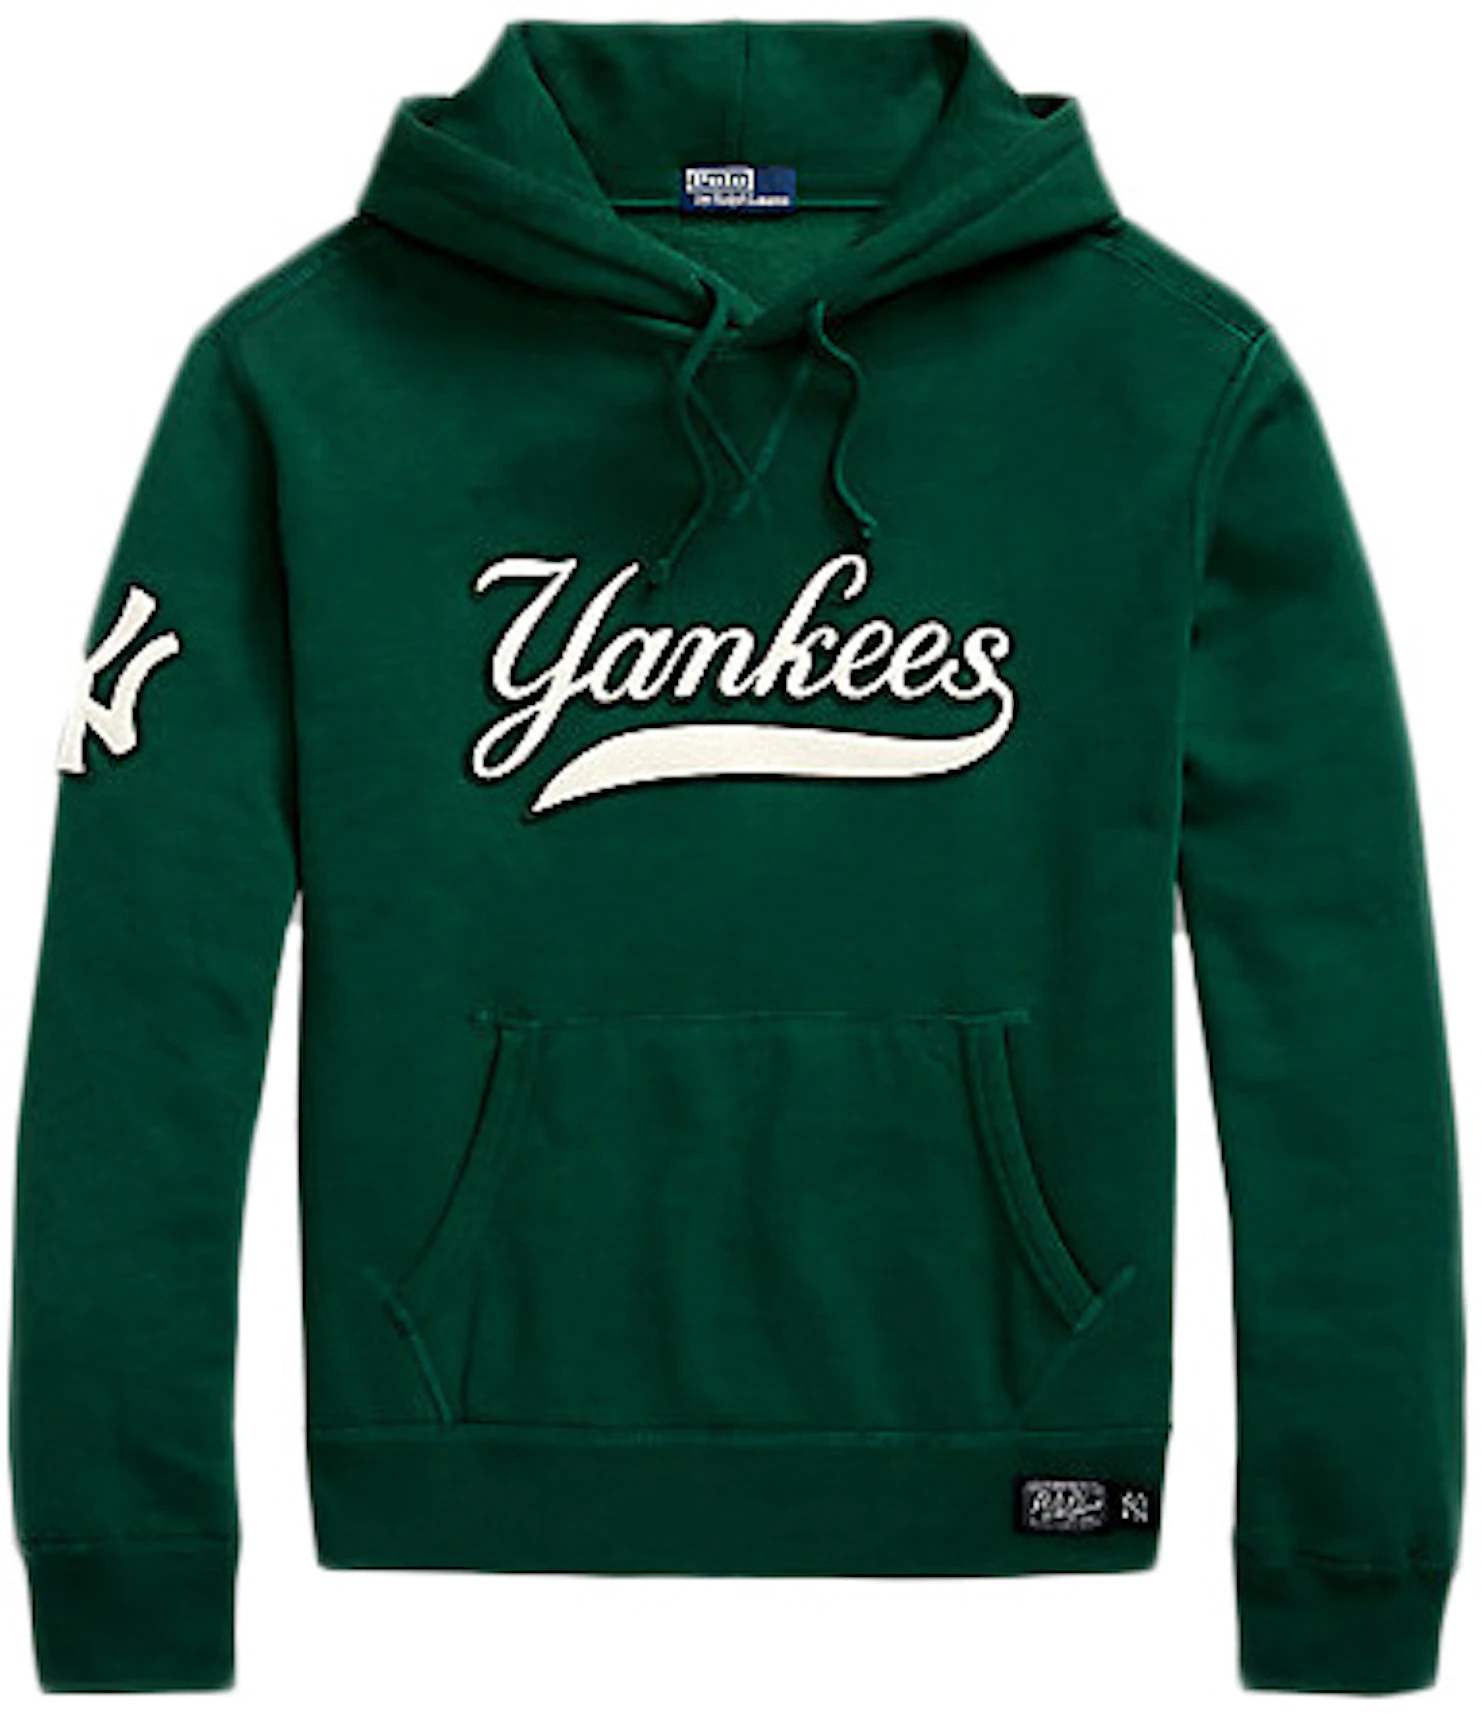 Polo Ralph Lauren Yankees Hoodie (Mens) New Forest - SS21 - US